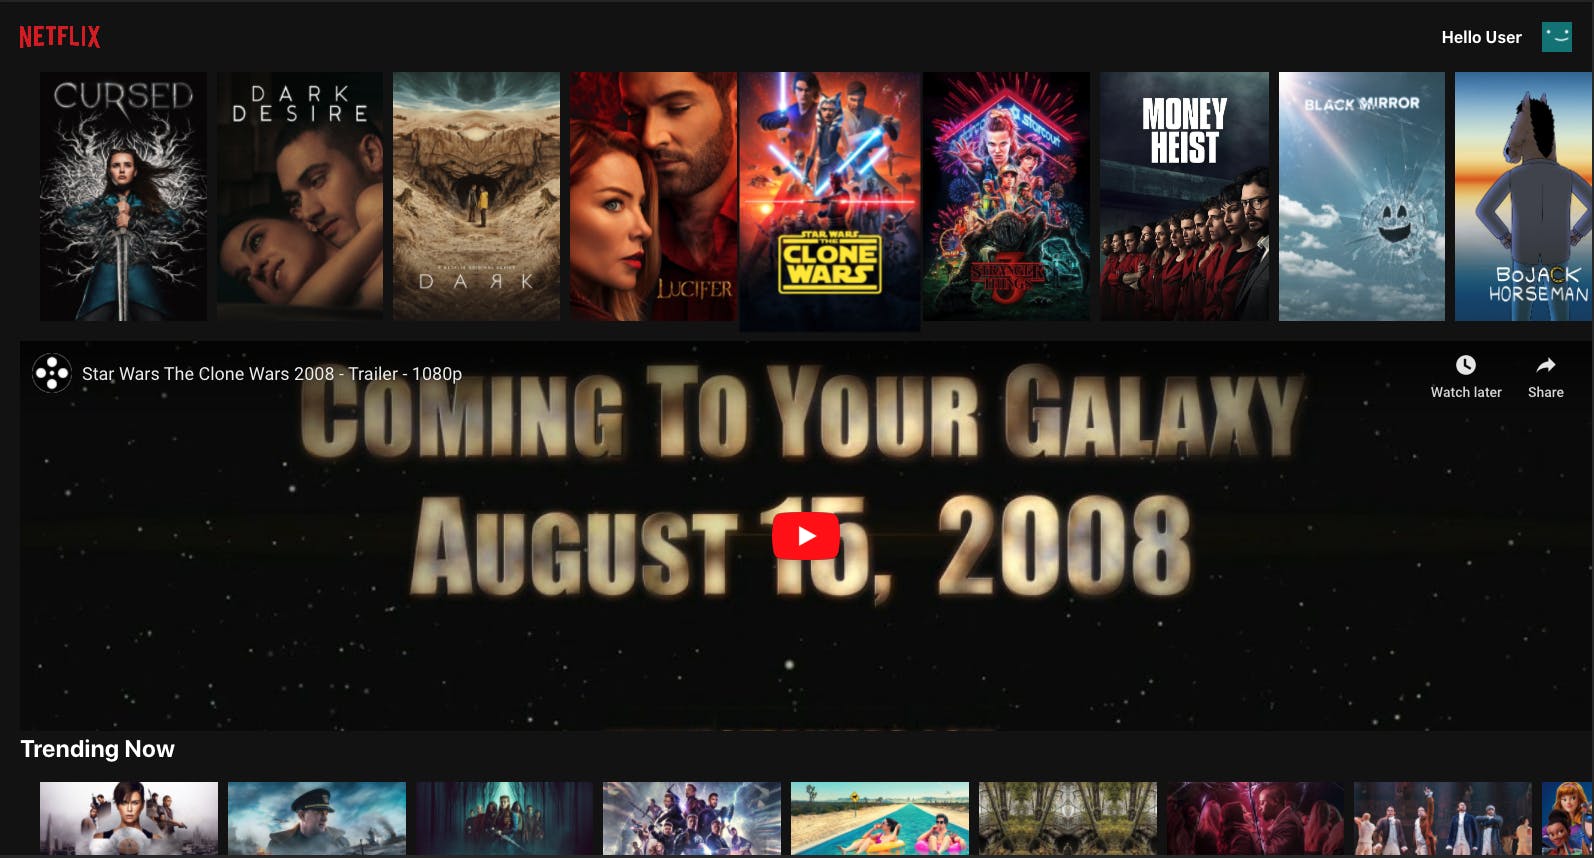 Netflix clone site showing listings and a selected trailer